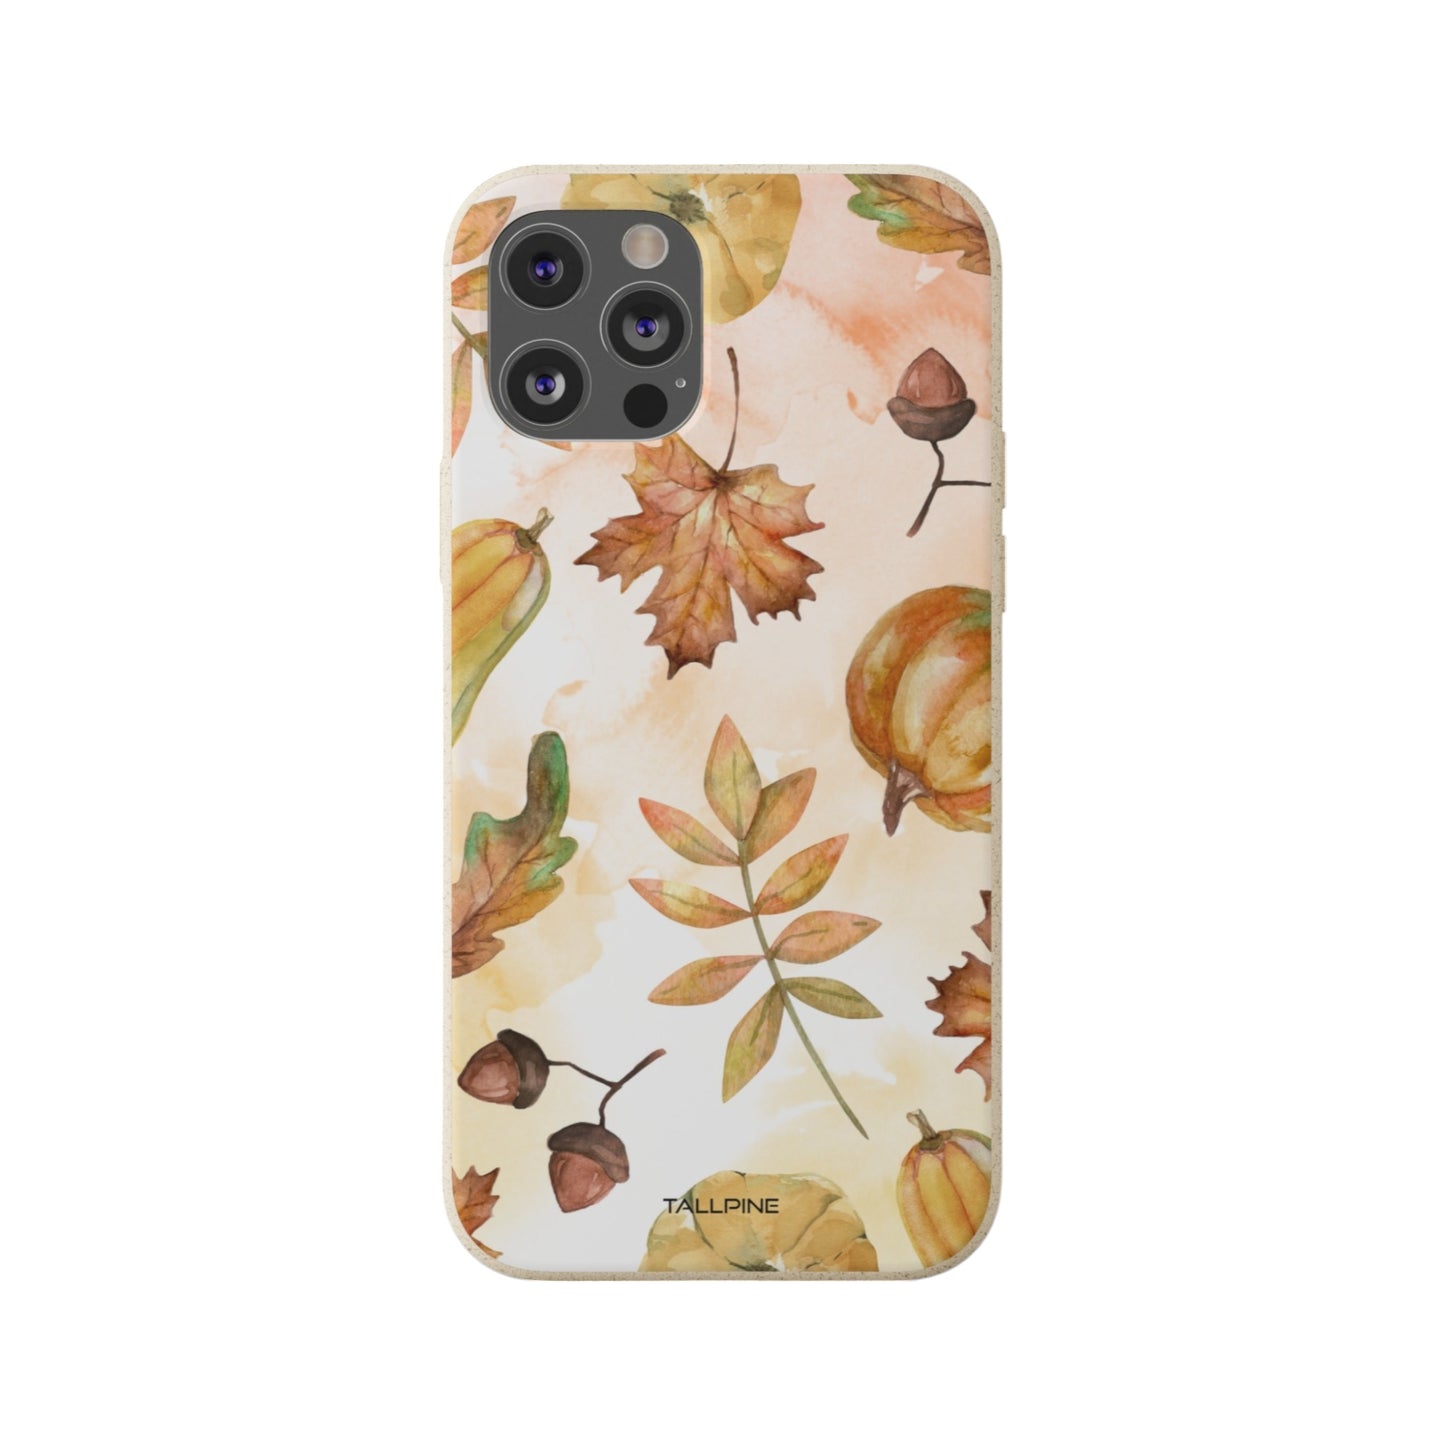 Autumn Harvest - Eco Case iPhone 12 Pro - Tallpine Cases | Sustainable and Eco-Friendly Phone Cases - autumn leaves nature New orange